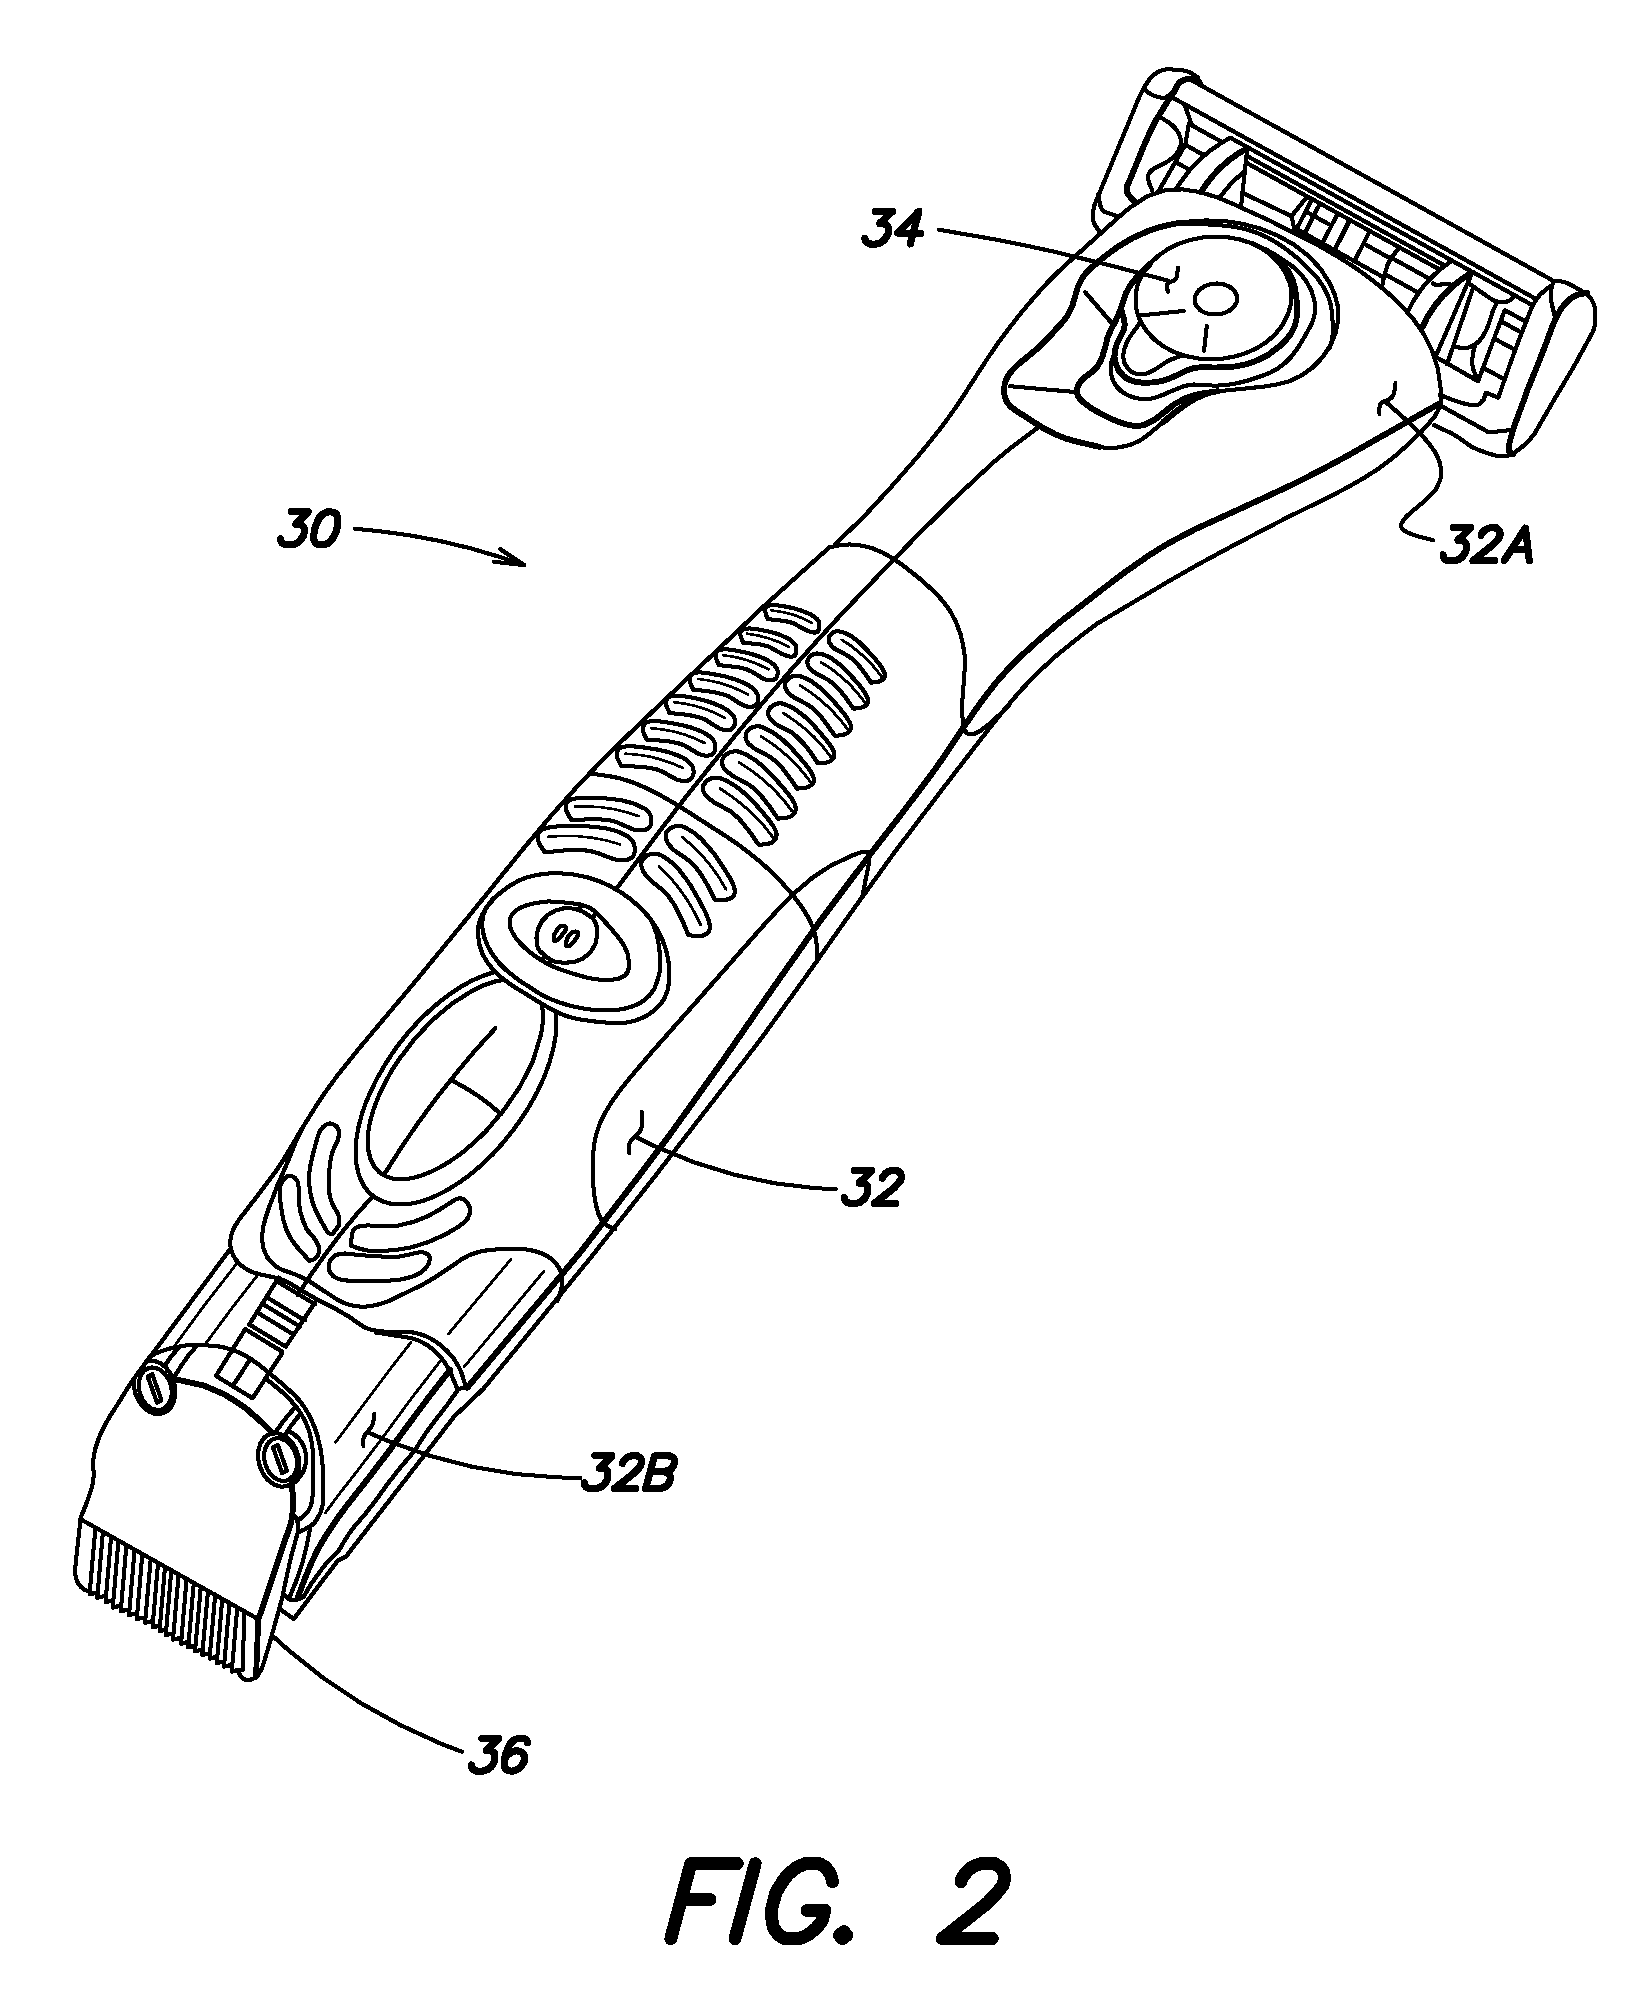 Grooming tool assembly